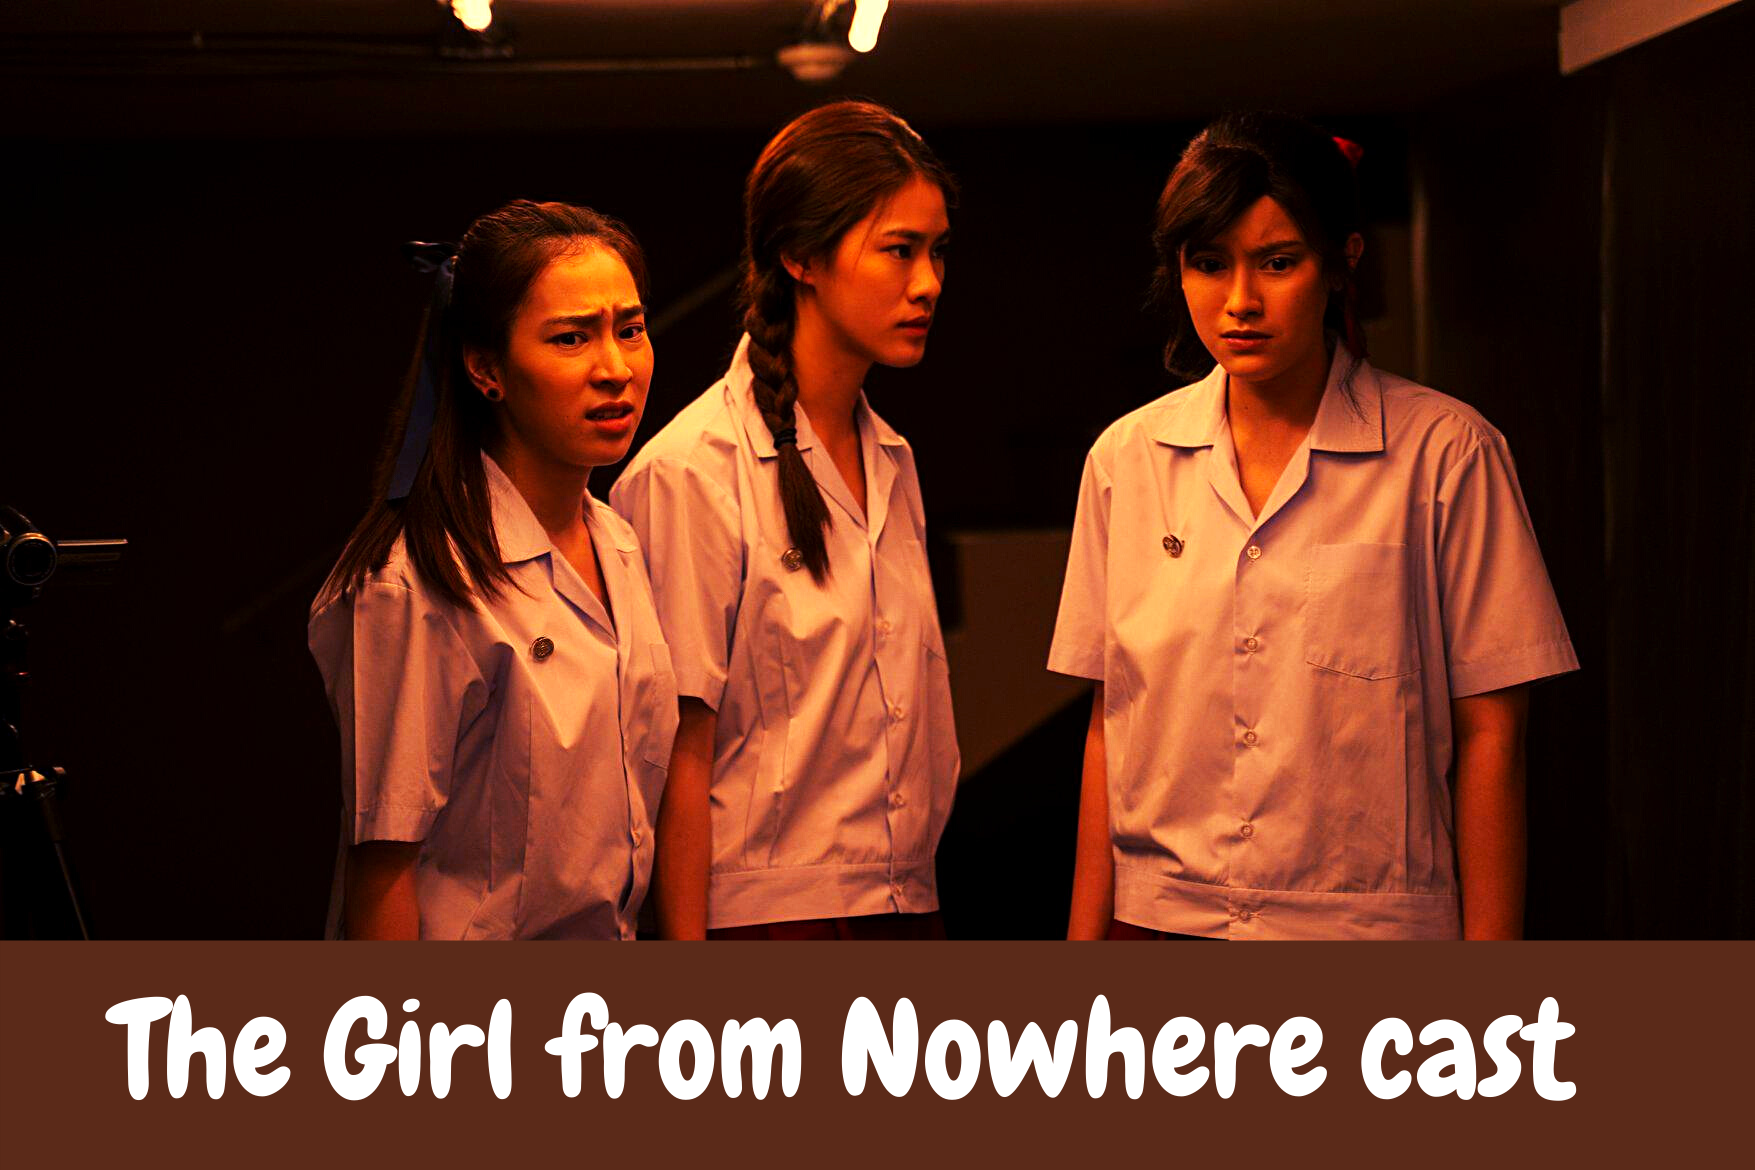 The Girl from Nowhere cast